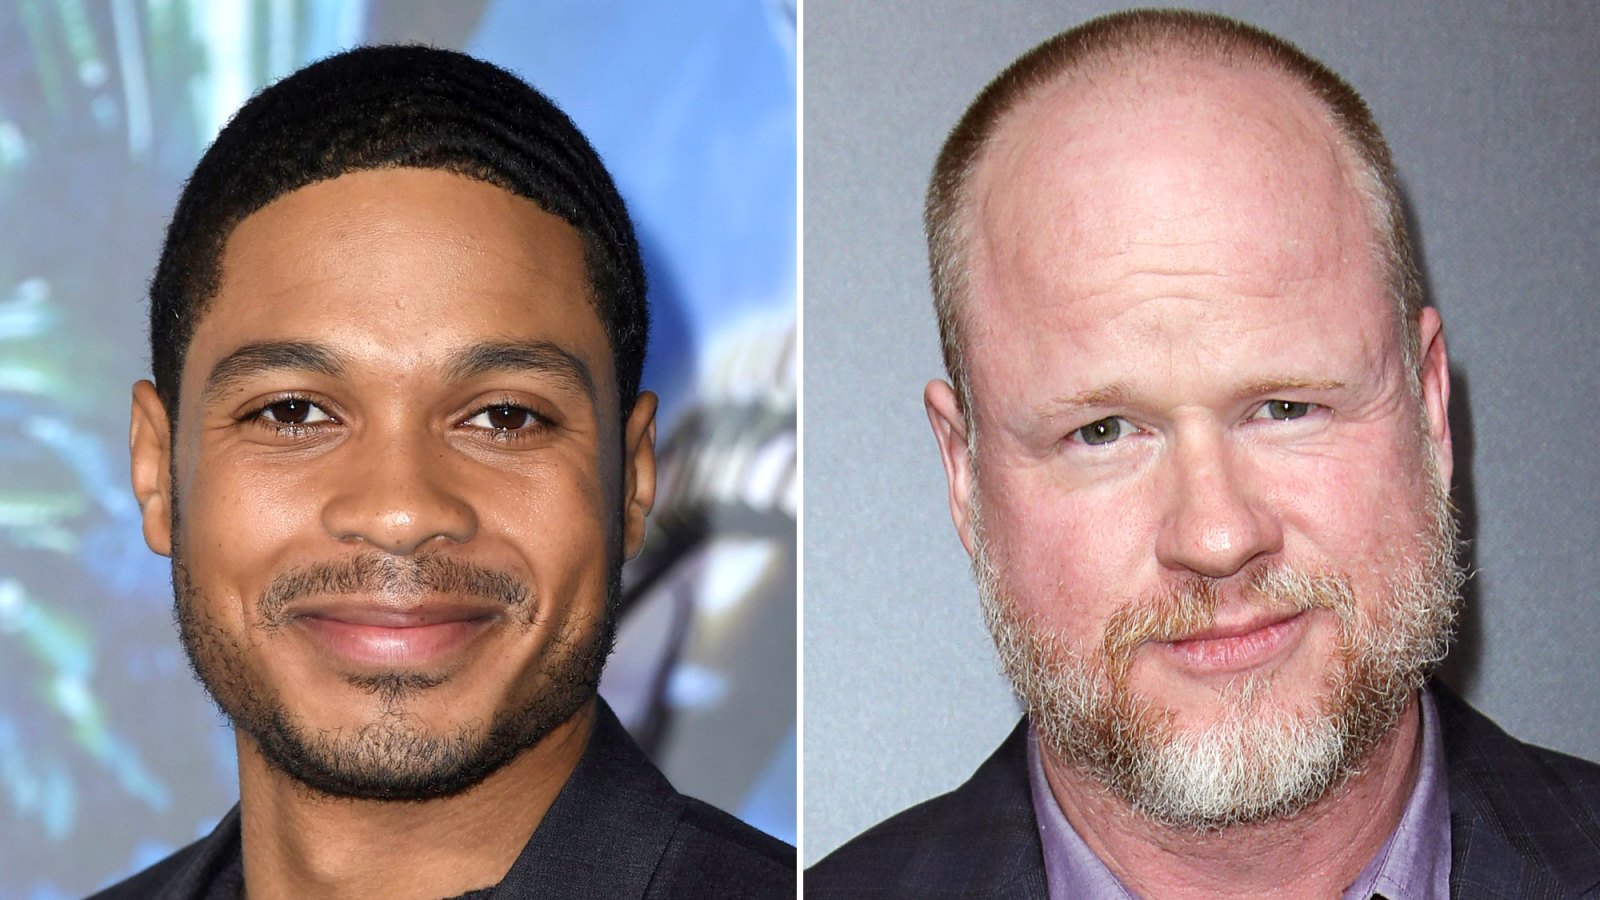 ‘Justice League’ Star Ray Fisher Accuses Director Joss Whedon of ‘Gross, Abusive’ Behavior on Set